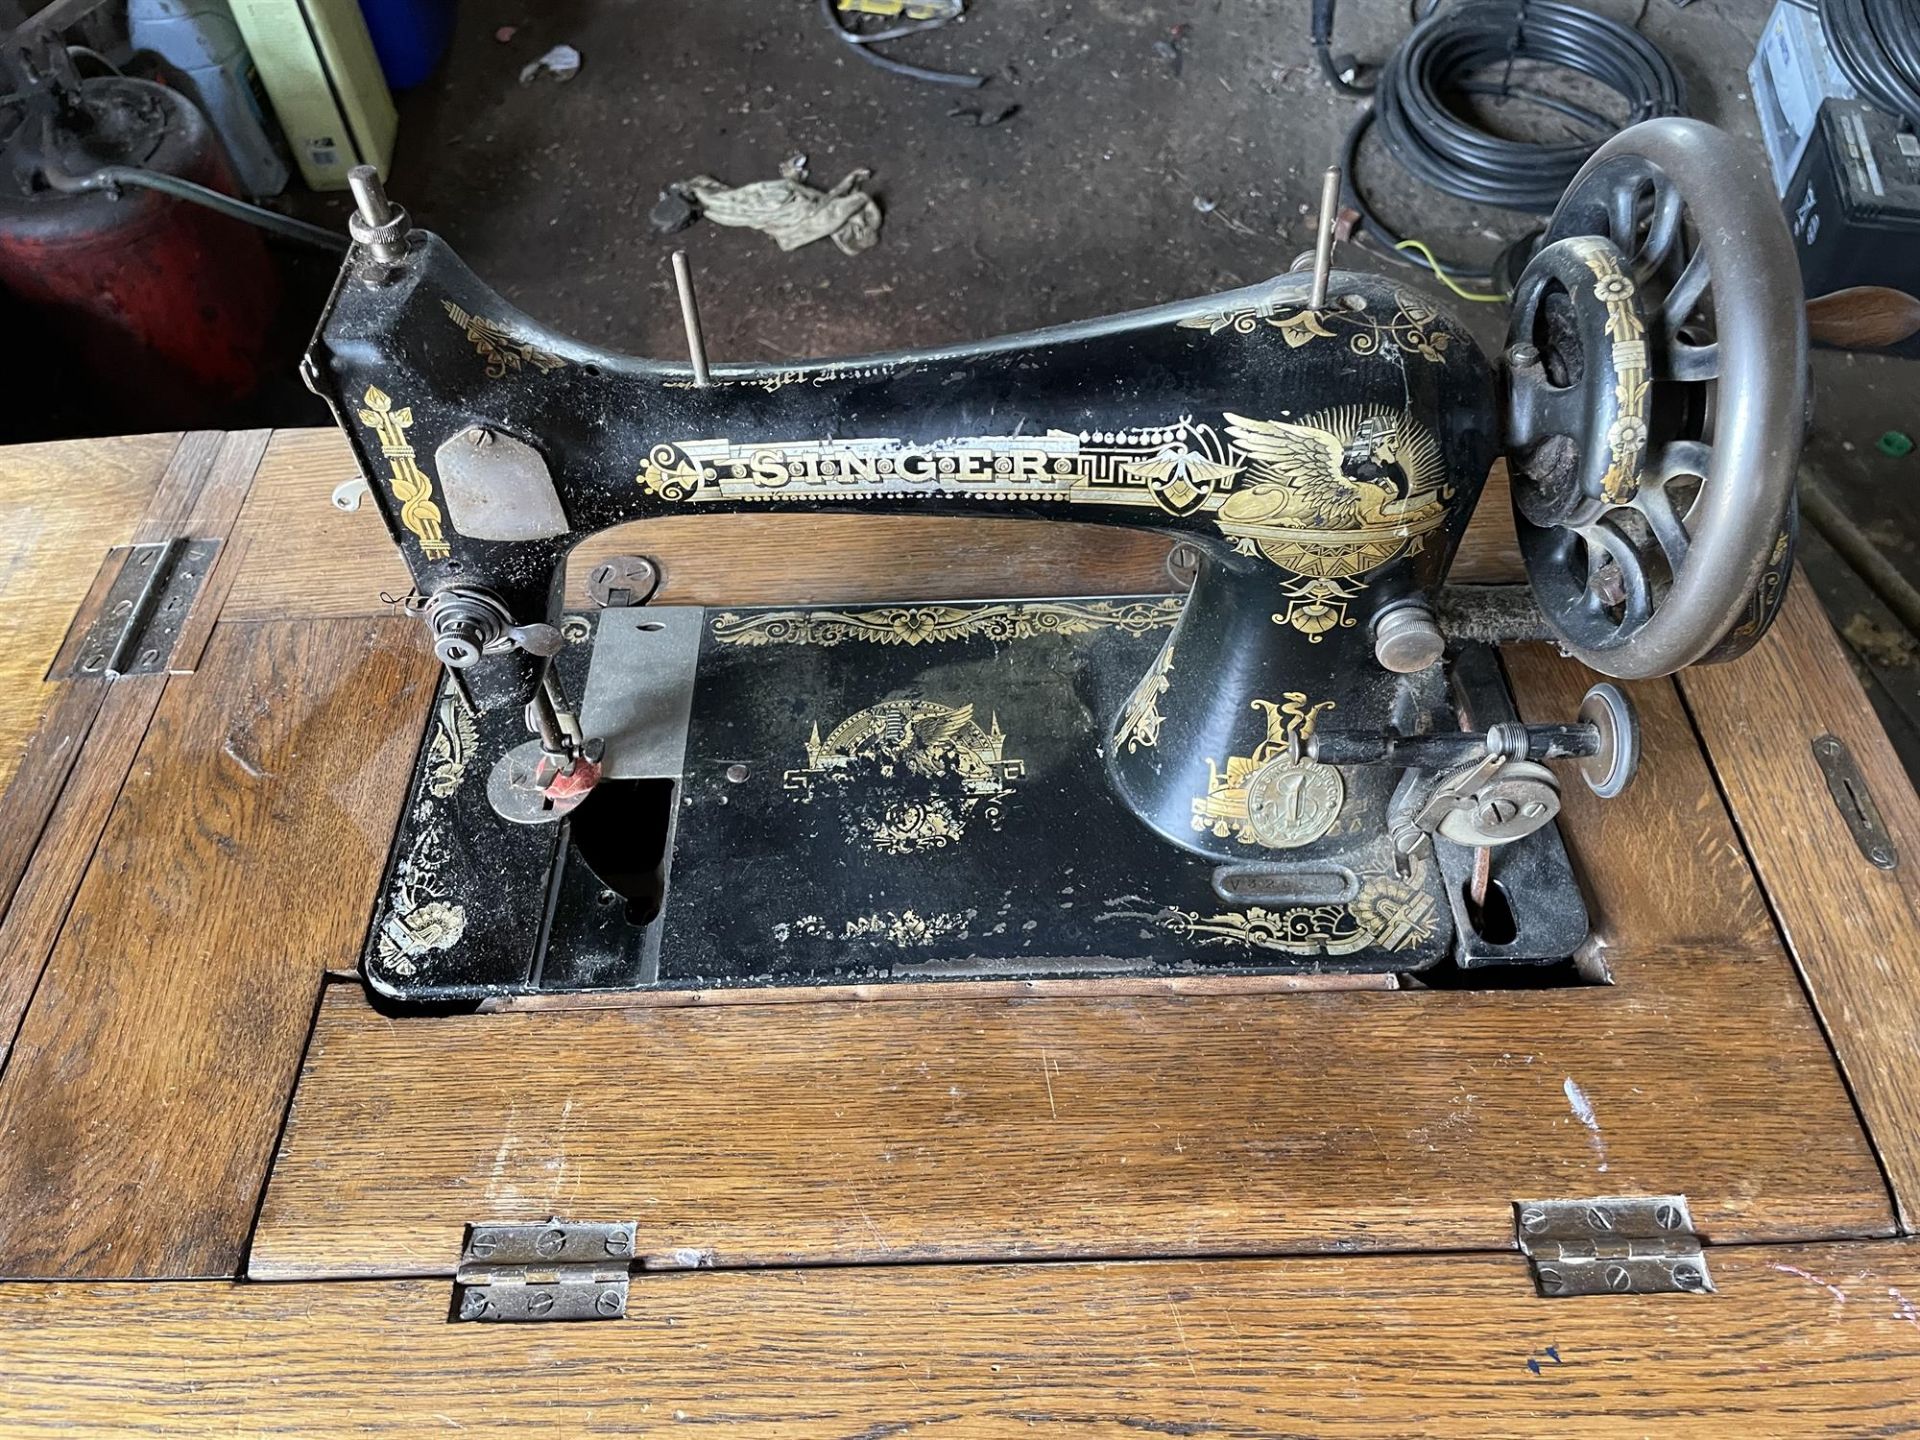 Singer Sewing Machine in Cabinet - Image 6 of 6